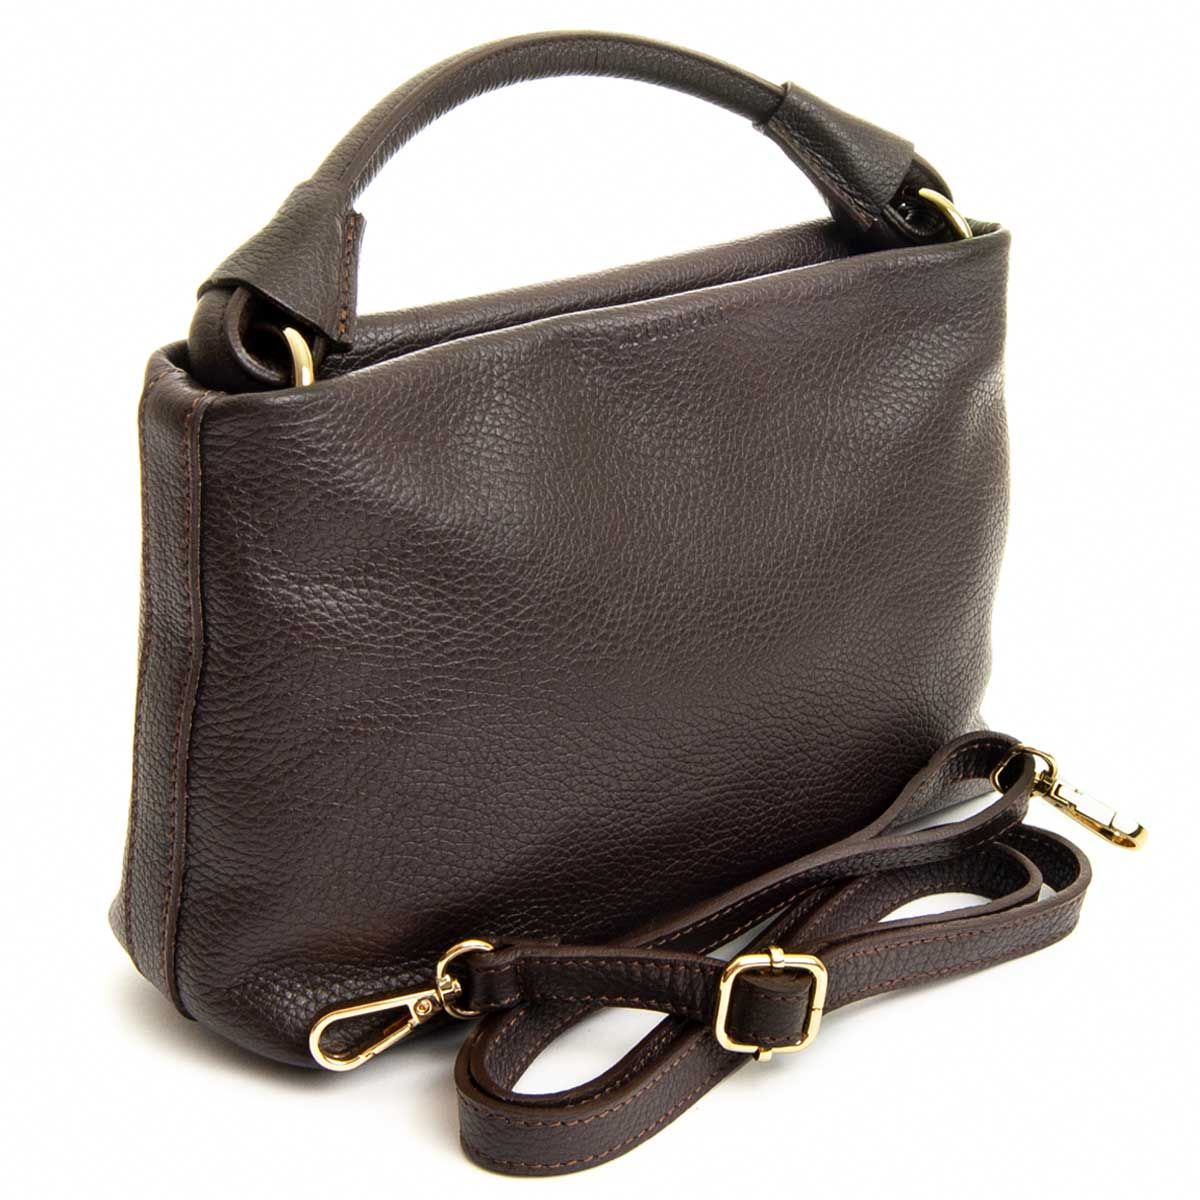 Exclusive design leather bag. Made of 100% natural chrome -free leather VI. Long adjustable handle and with an option to remove. High quality zip closure. Interior pocket with zipper. A bag that can't be missing in your closet. Doubly reinforced for greater durability. Approximate measures: 17cm high 26cm Width Depth 8cm. 10 years warranty. Purapiel guarantee. Made in Spain.